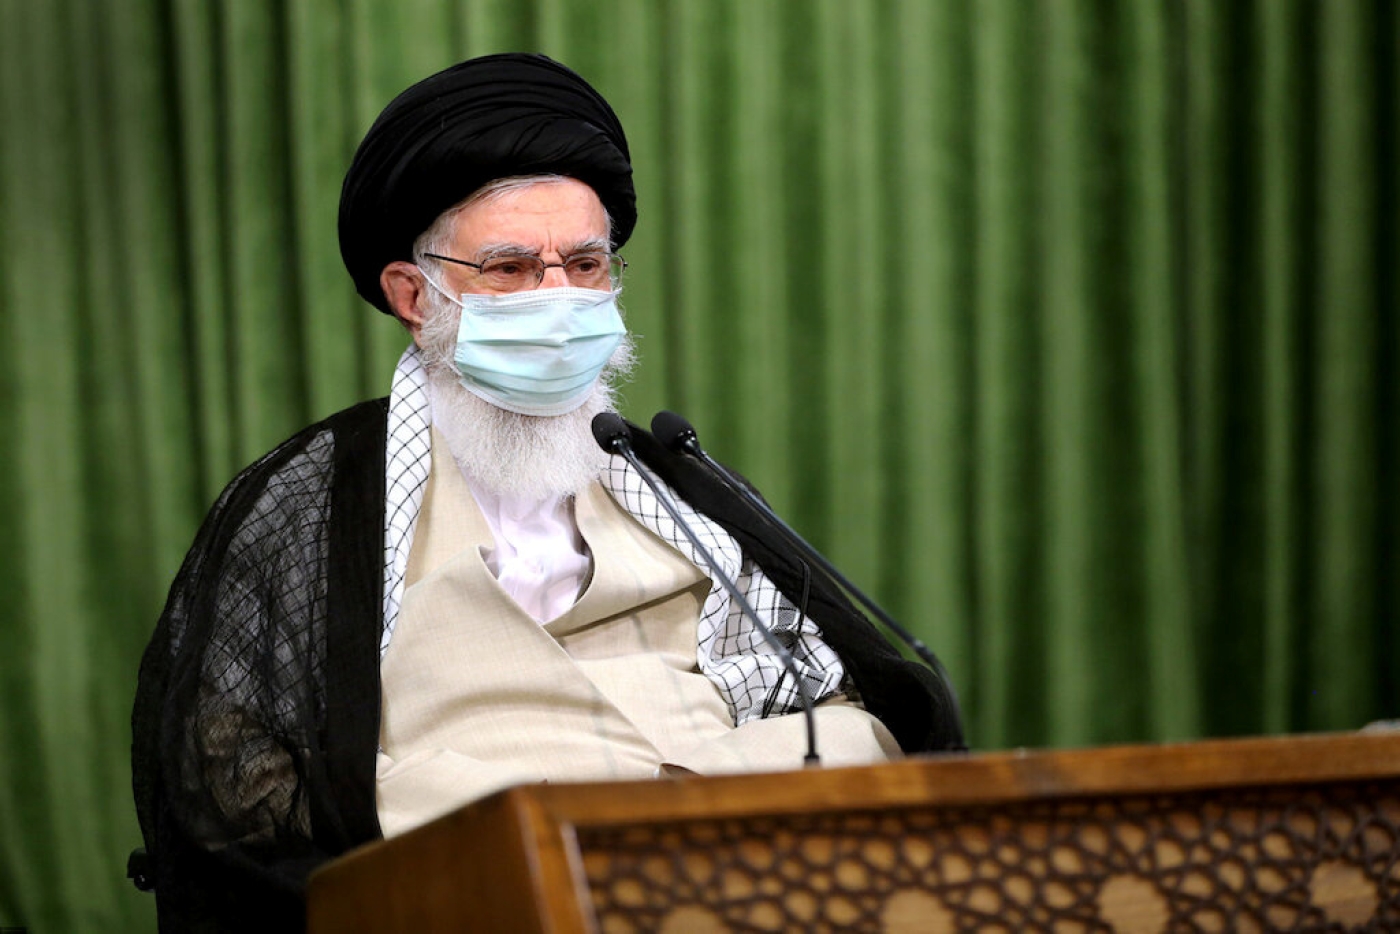 Khamenei called the US the "main enemy" of Iran, and urged Iranians to resist US pressure